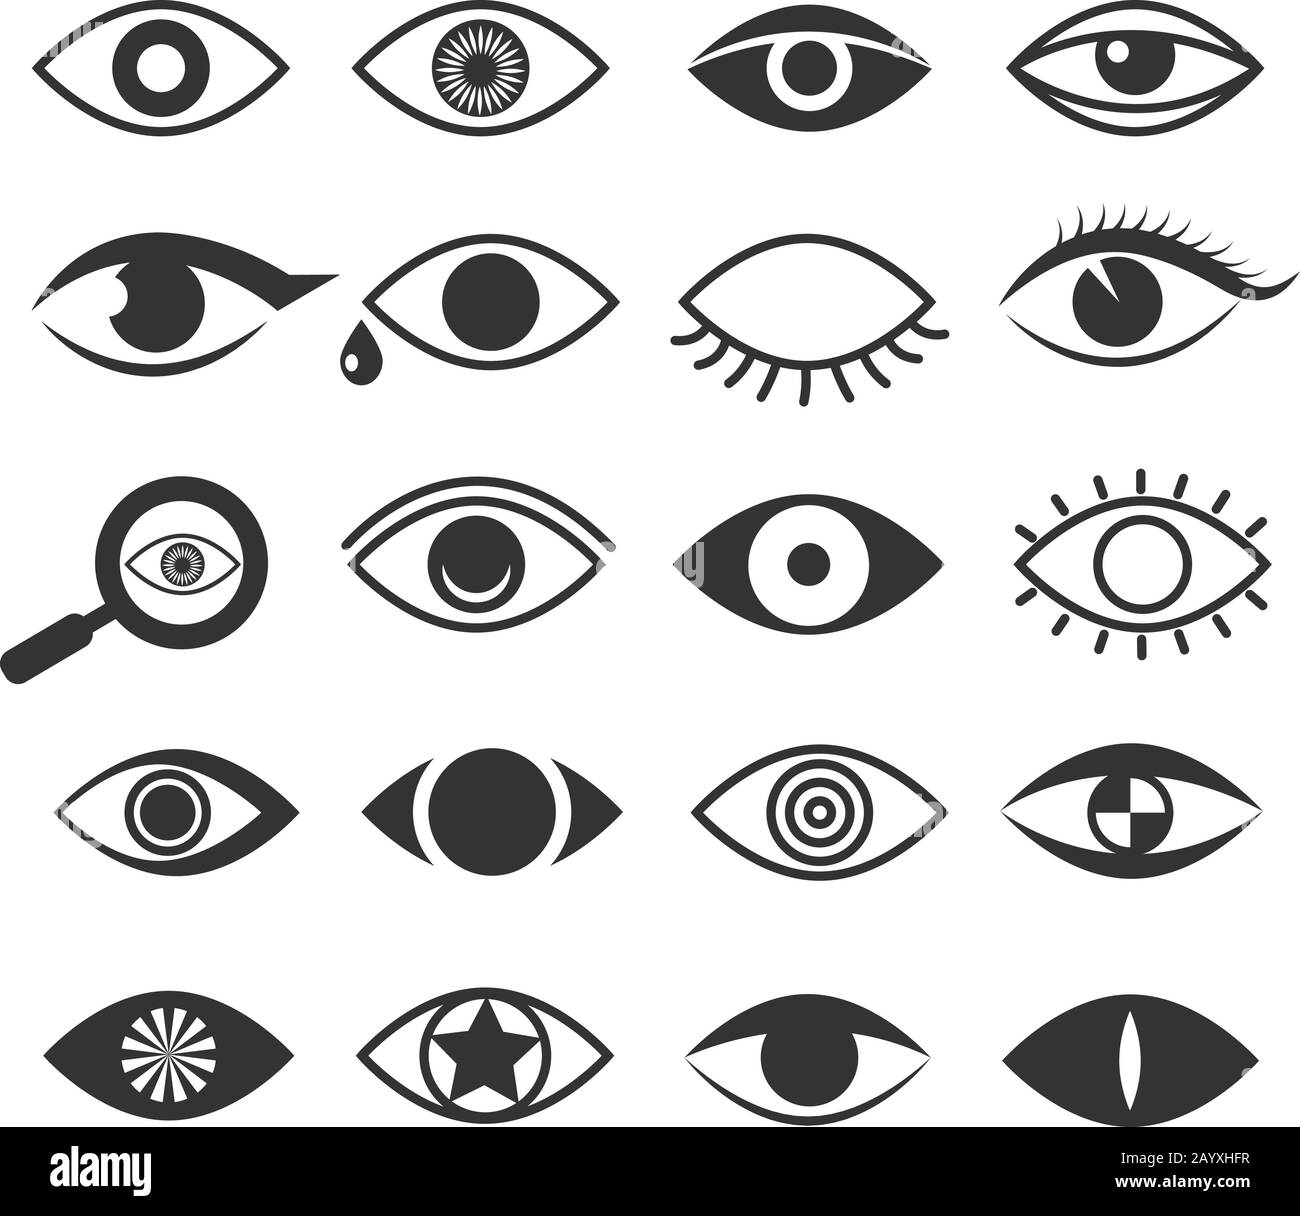 Eye sight and vision Stock Vector Images - Alamy